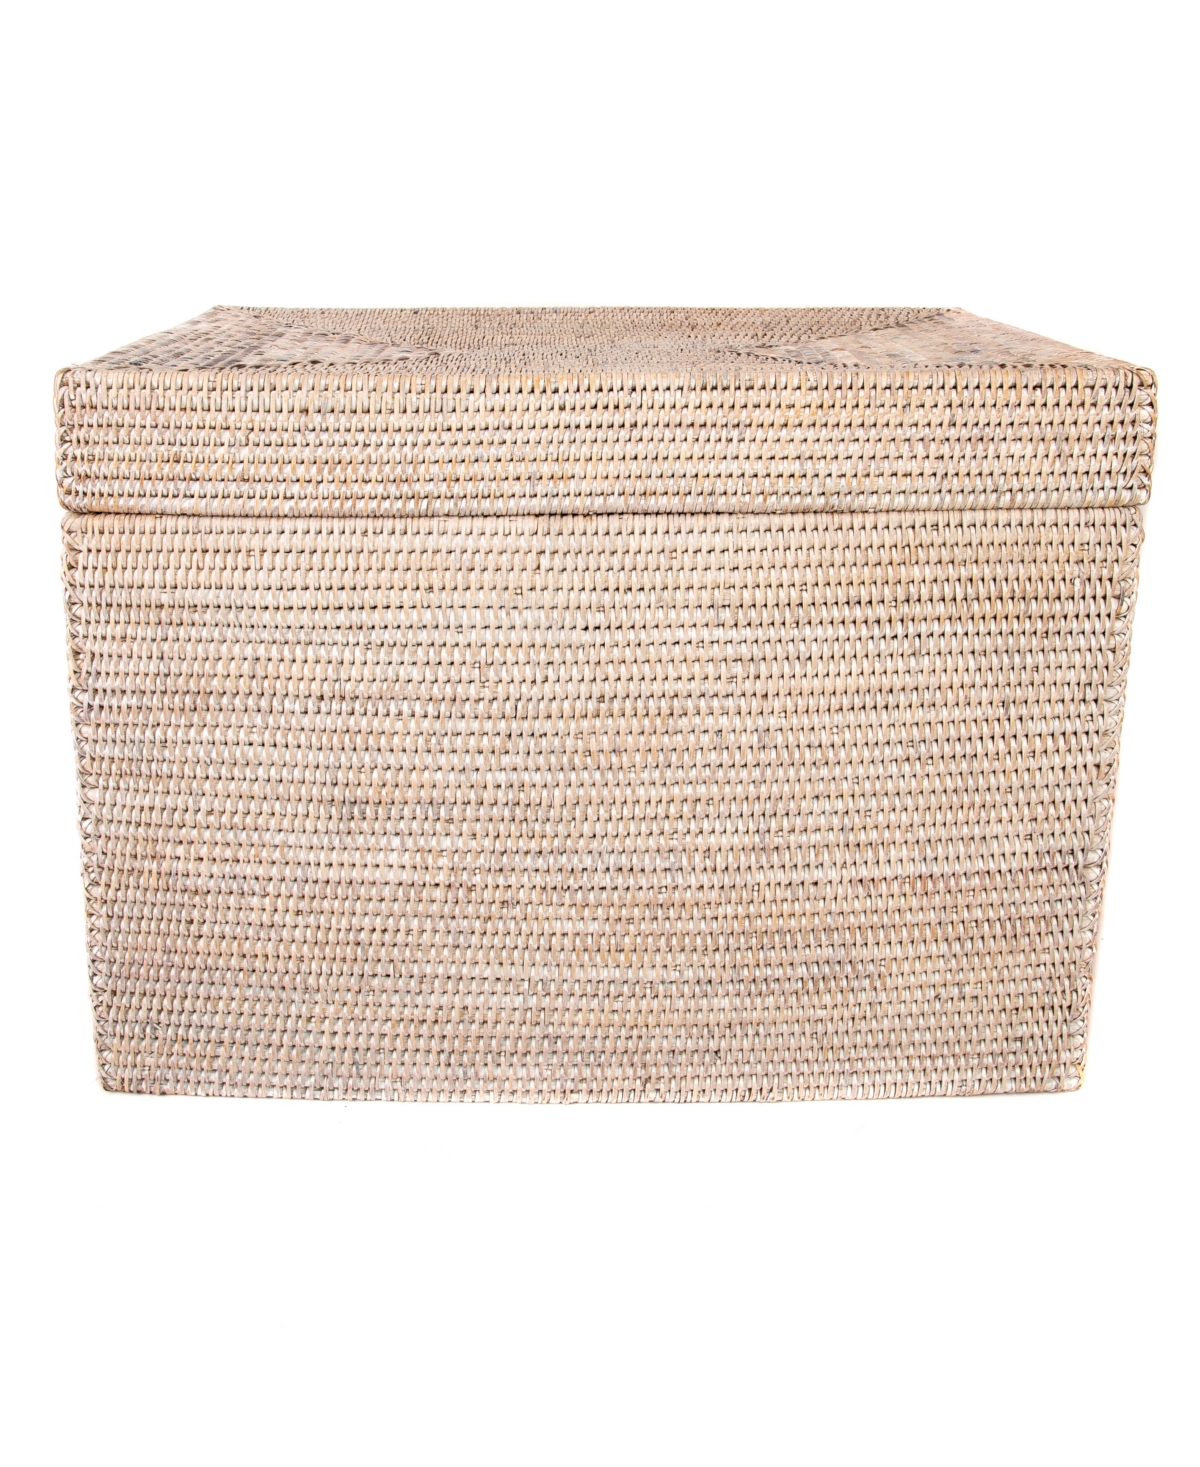 Shop Artifacts Trading Company Artifacts Rattan Rectangular Hinged Chest In Off-white